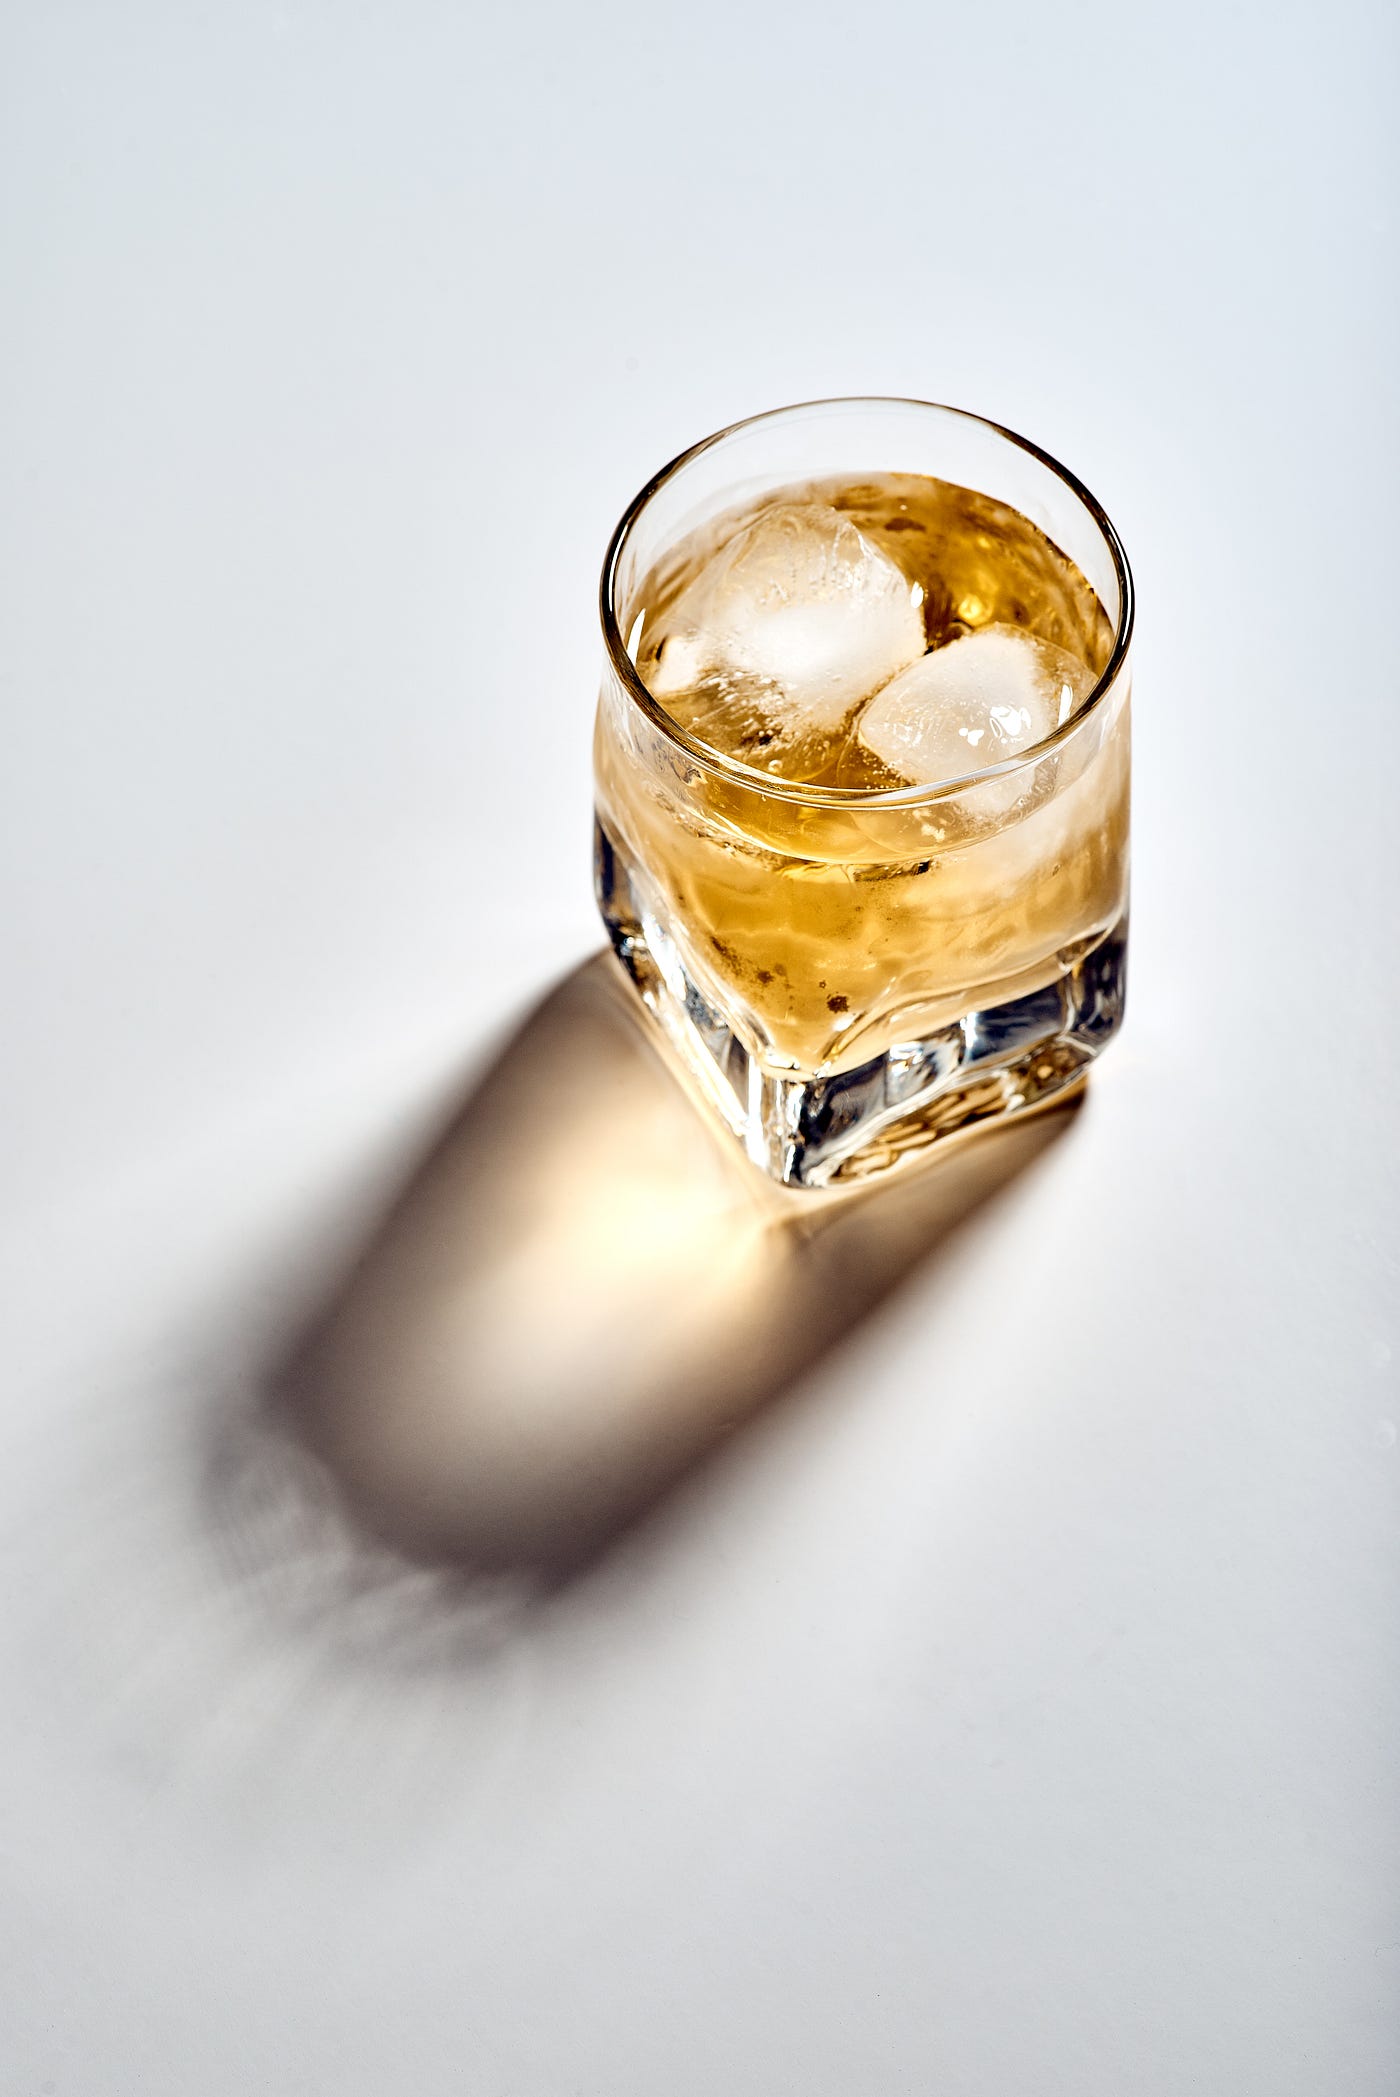 Amber-colored alcohol fills a small clear glass. Reducing heavy alcohol consumption (to moderate or none) is one of the natural ways to drop your blood pressure.